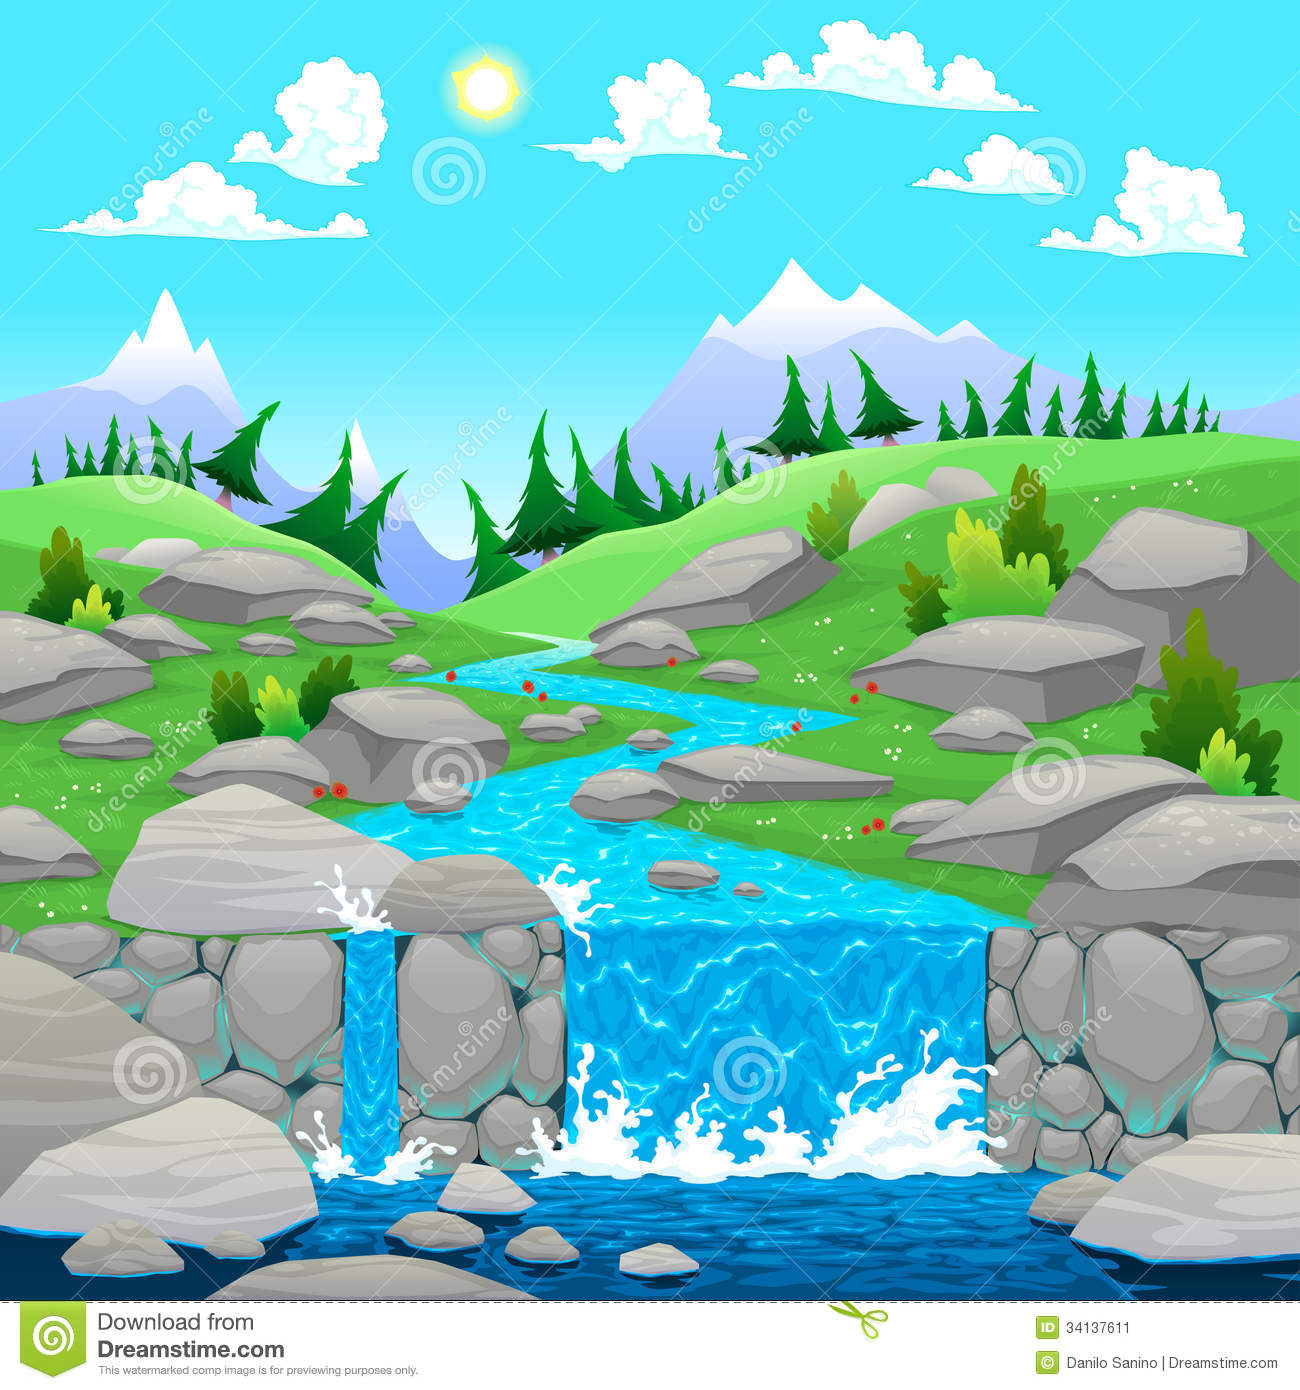 Rivers Clipart Mountain Landscape With River